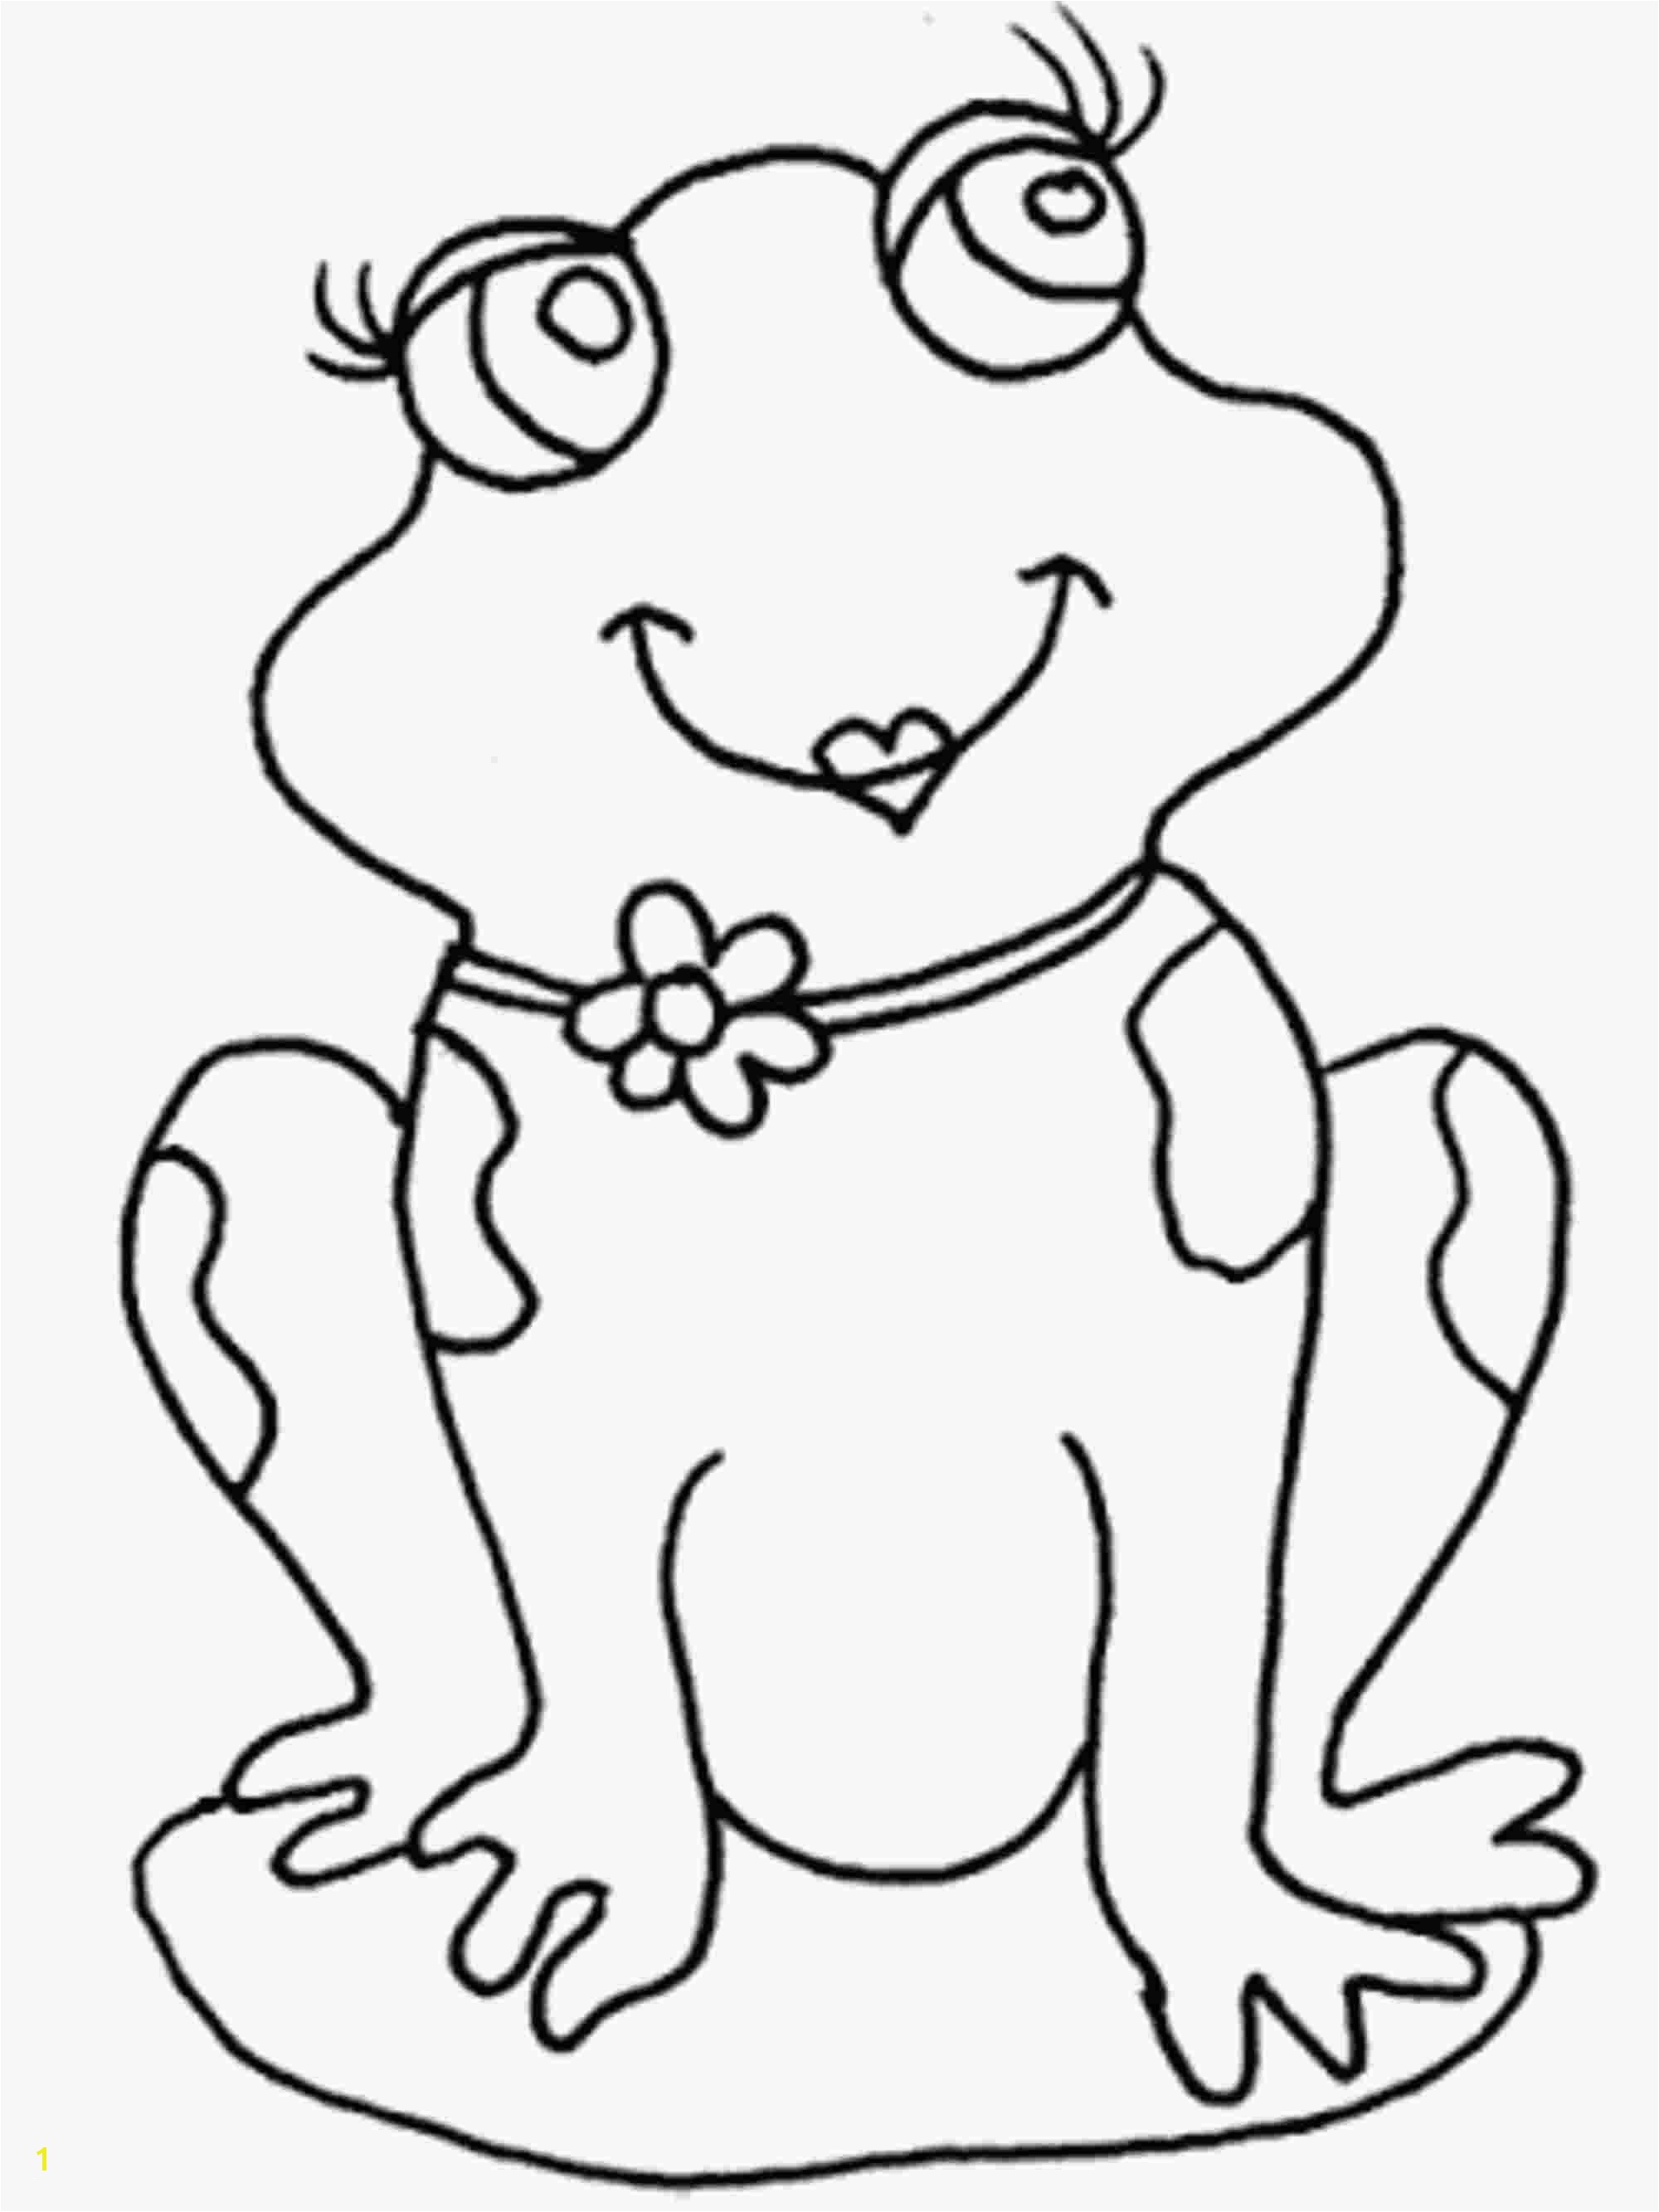 Lily Pad Coloring Page Free 13 Awesome Lily Pad Coloring Page